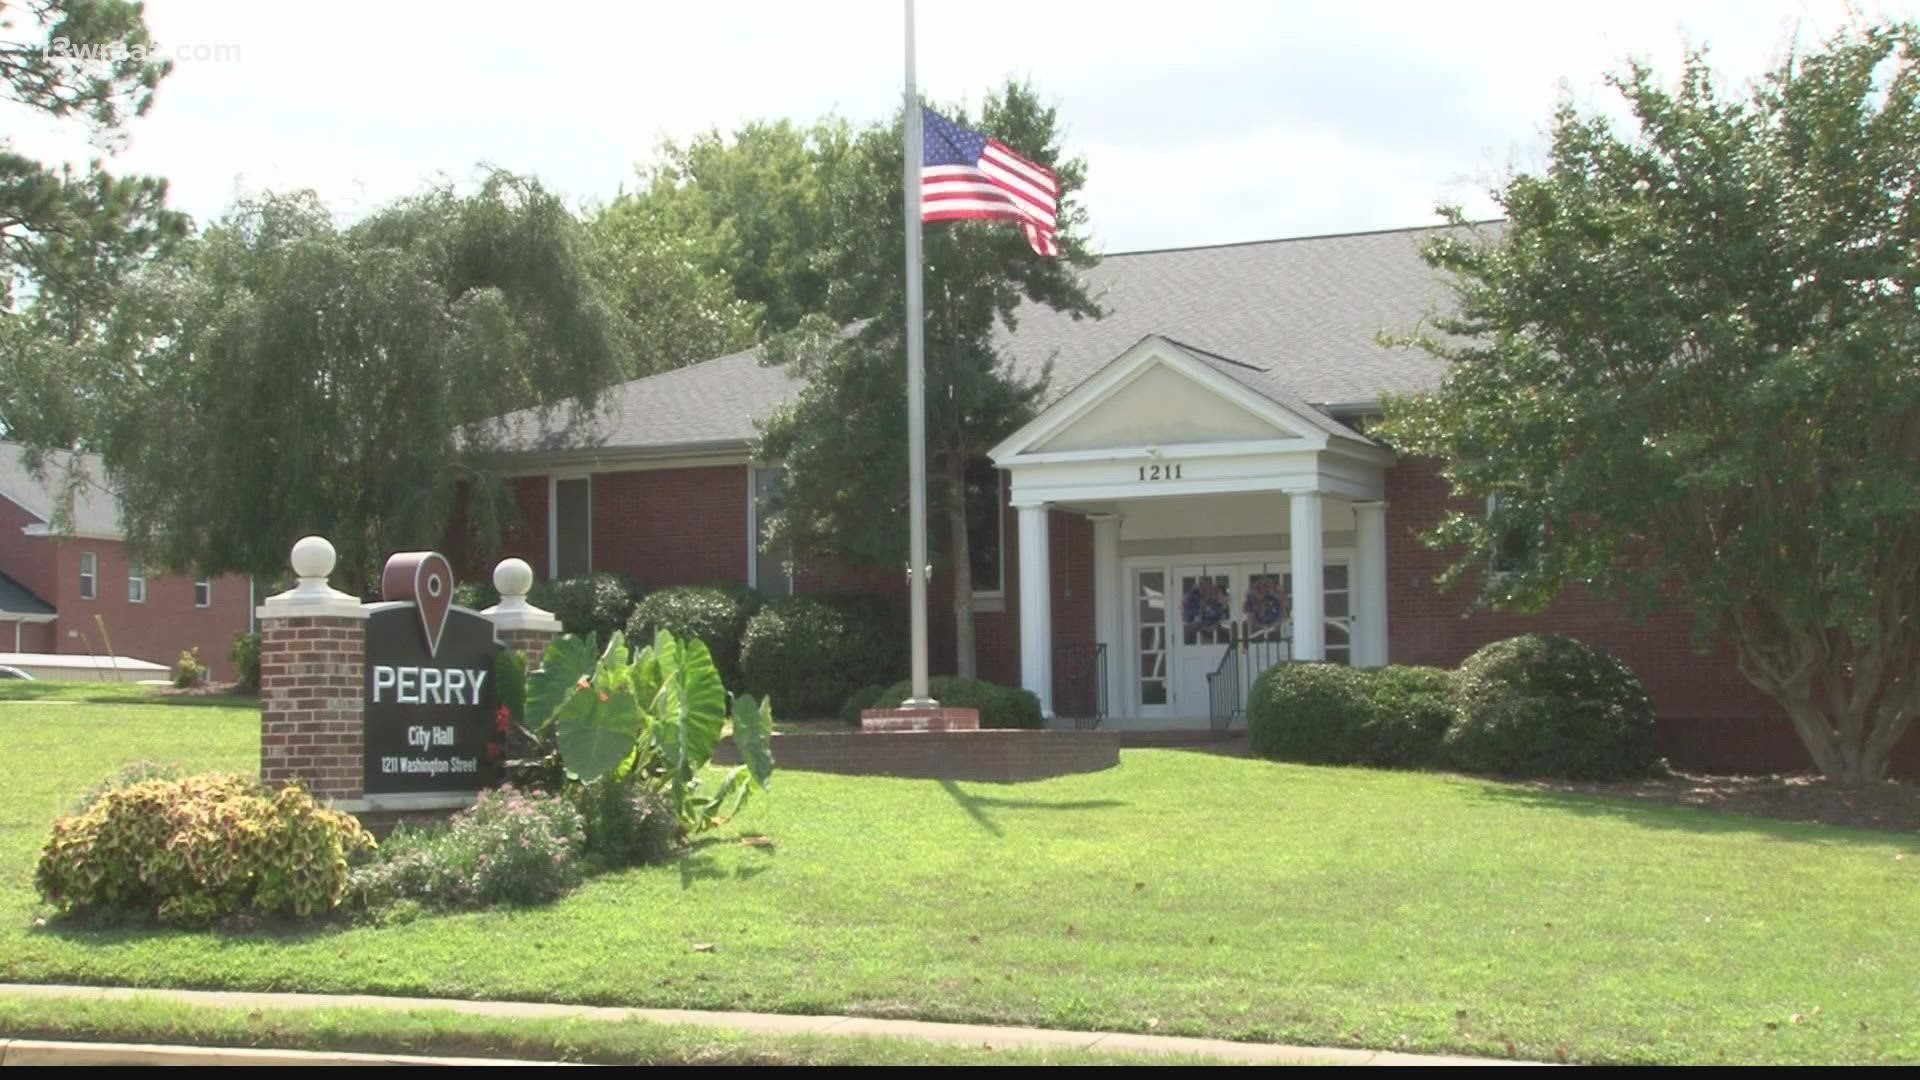 The US Census shows Perry is the fastest growing city in Houston County. City officials are making changes to support that growth